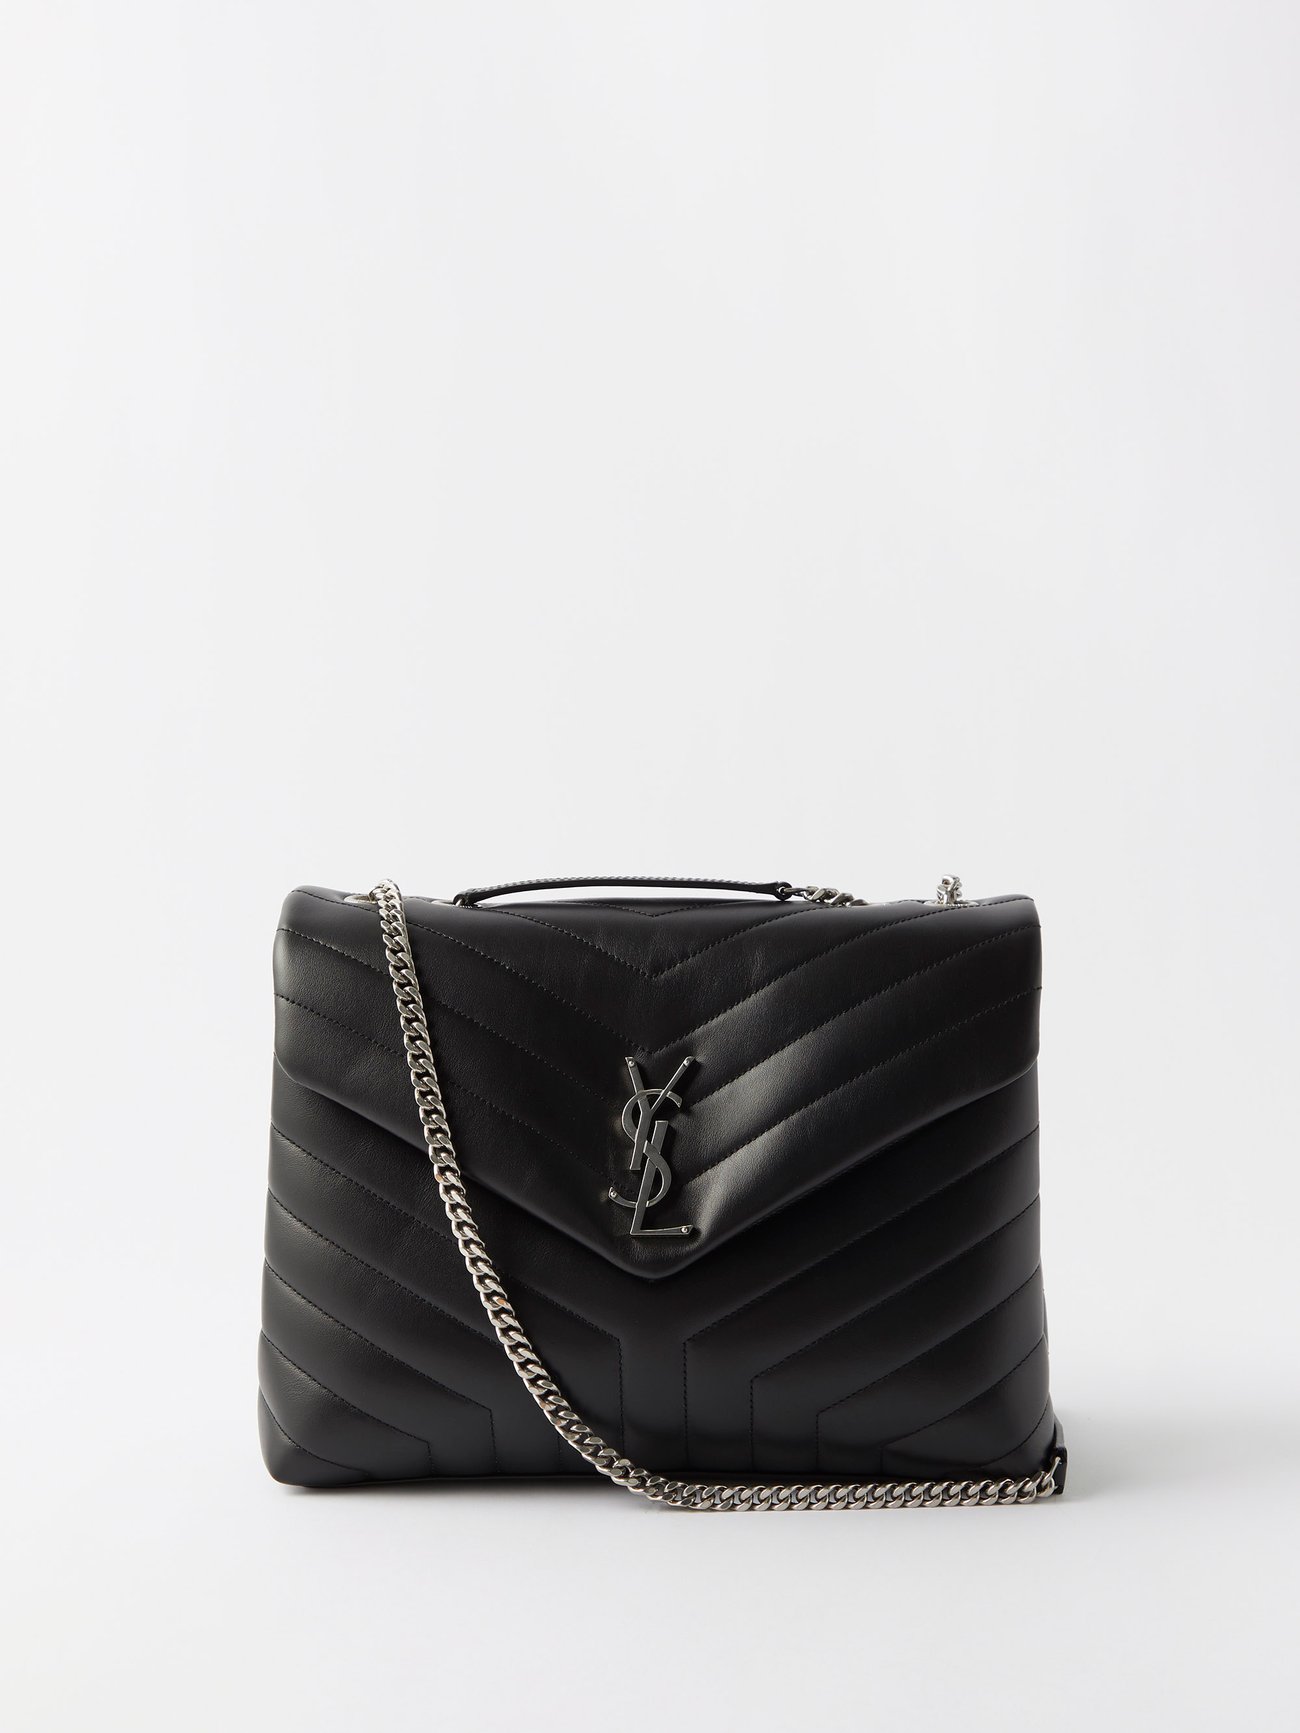 Saint Laurent Small Puffer Chain Bag in Navy - ShopStyle